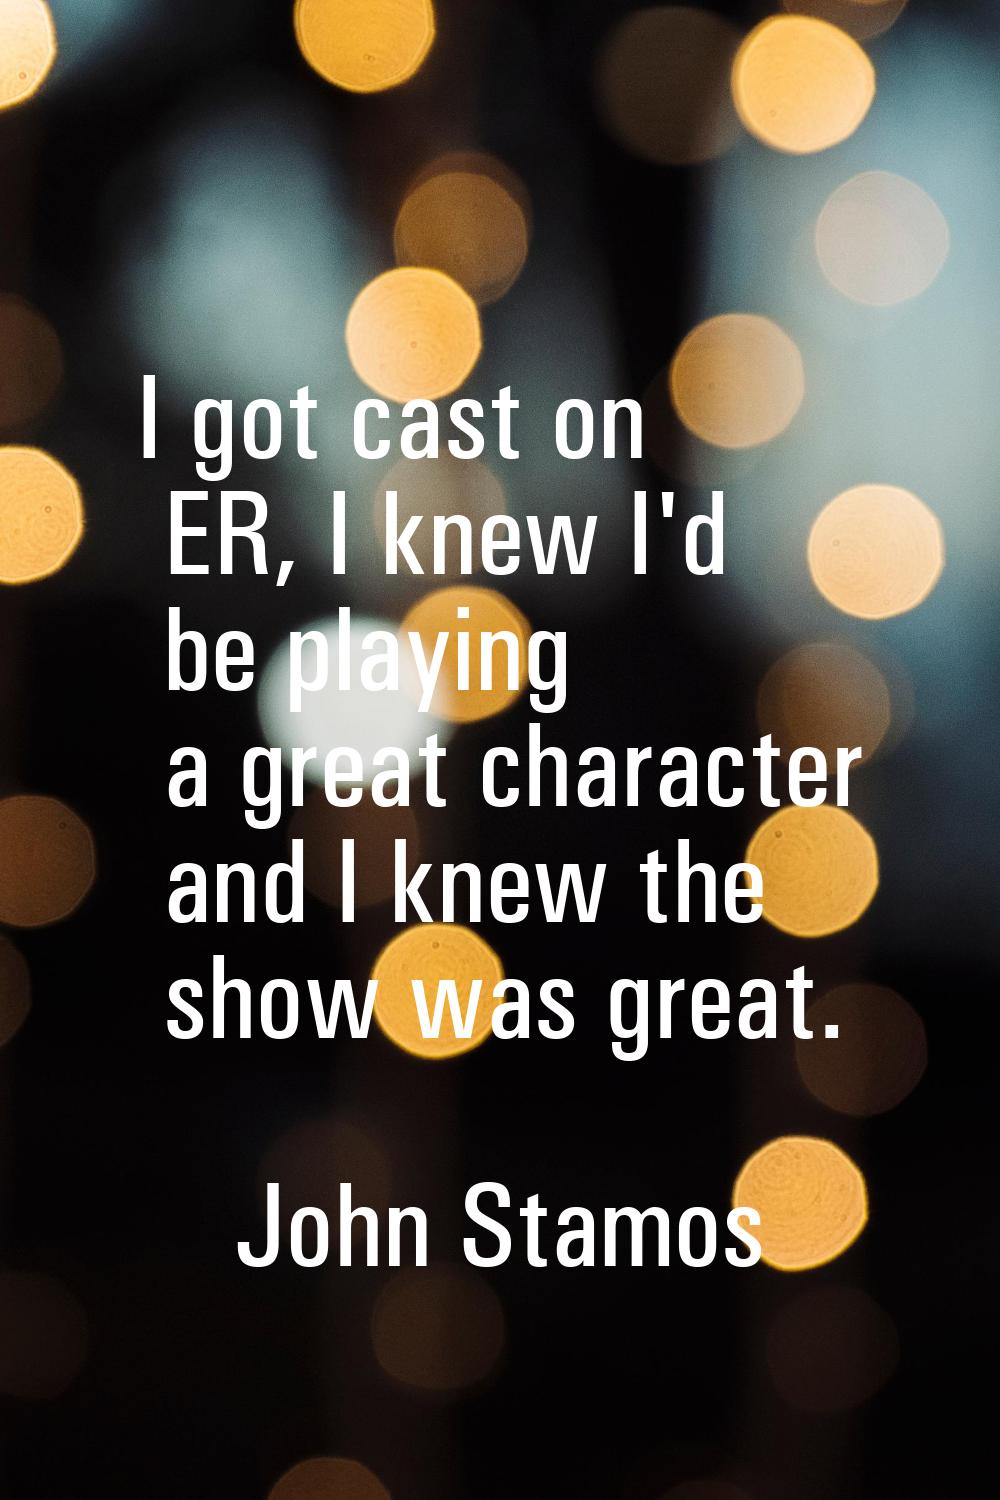 I got cast on ER, I knew I'd be playing a great character and I knew the show was great.